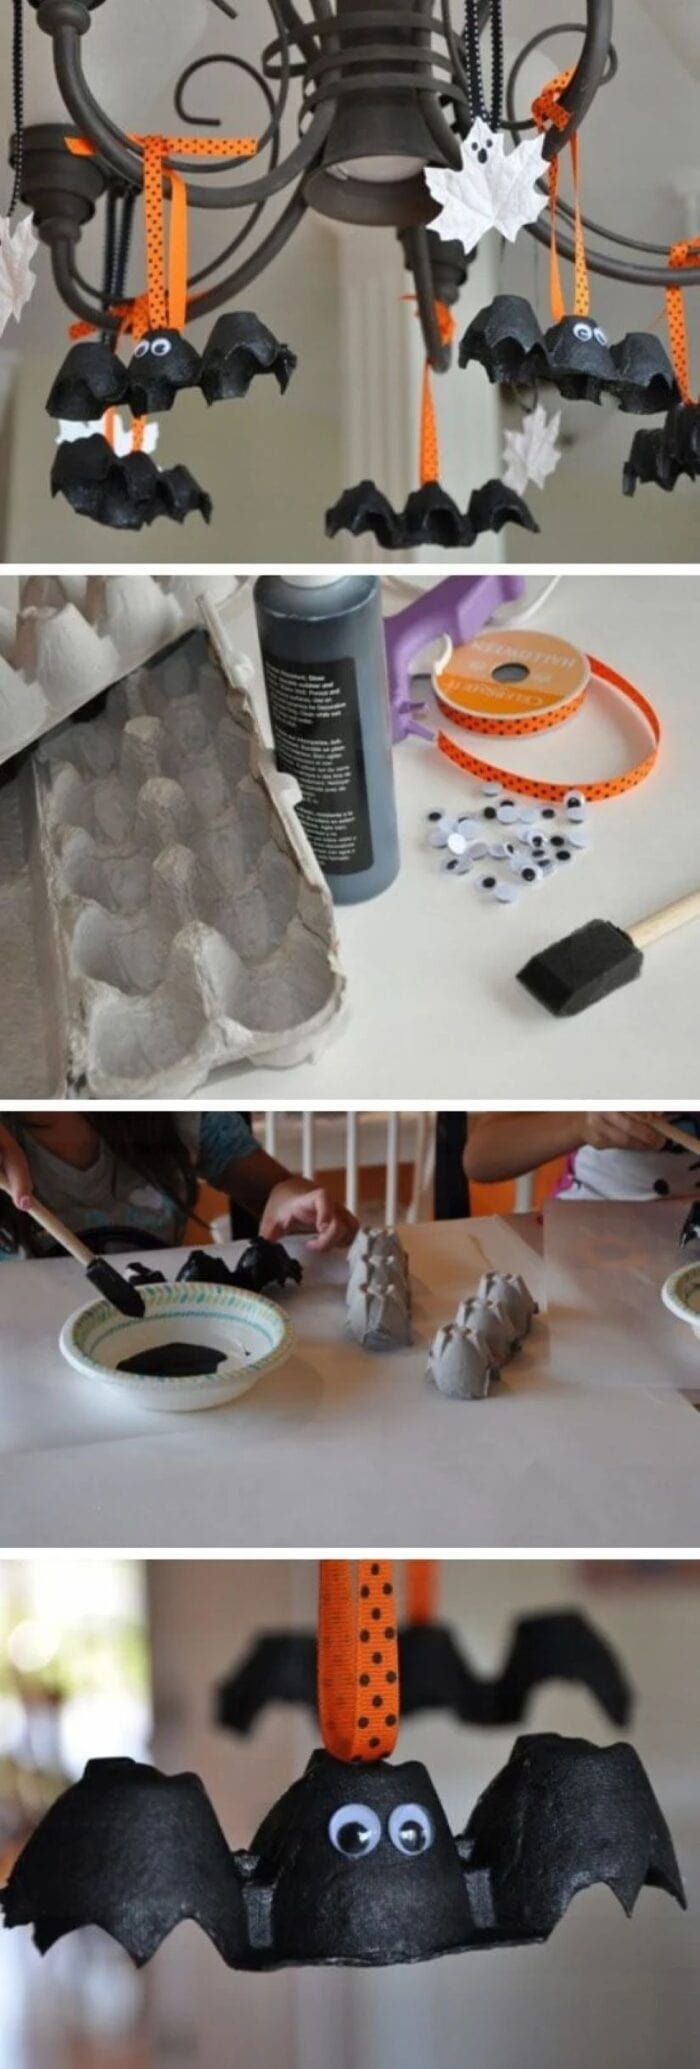 Egg Carton Bats...these are the BEST Homemade Halloween Decorations & Craft Ideas!